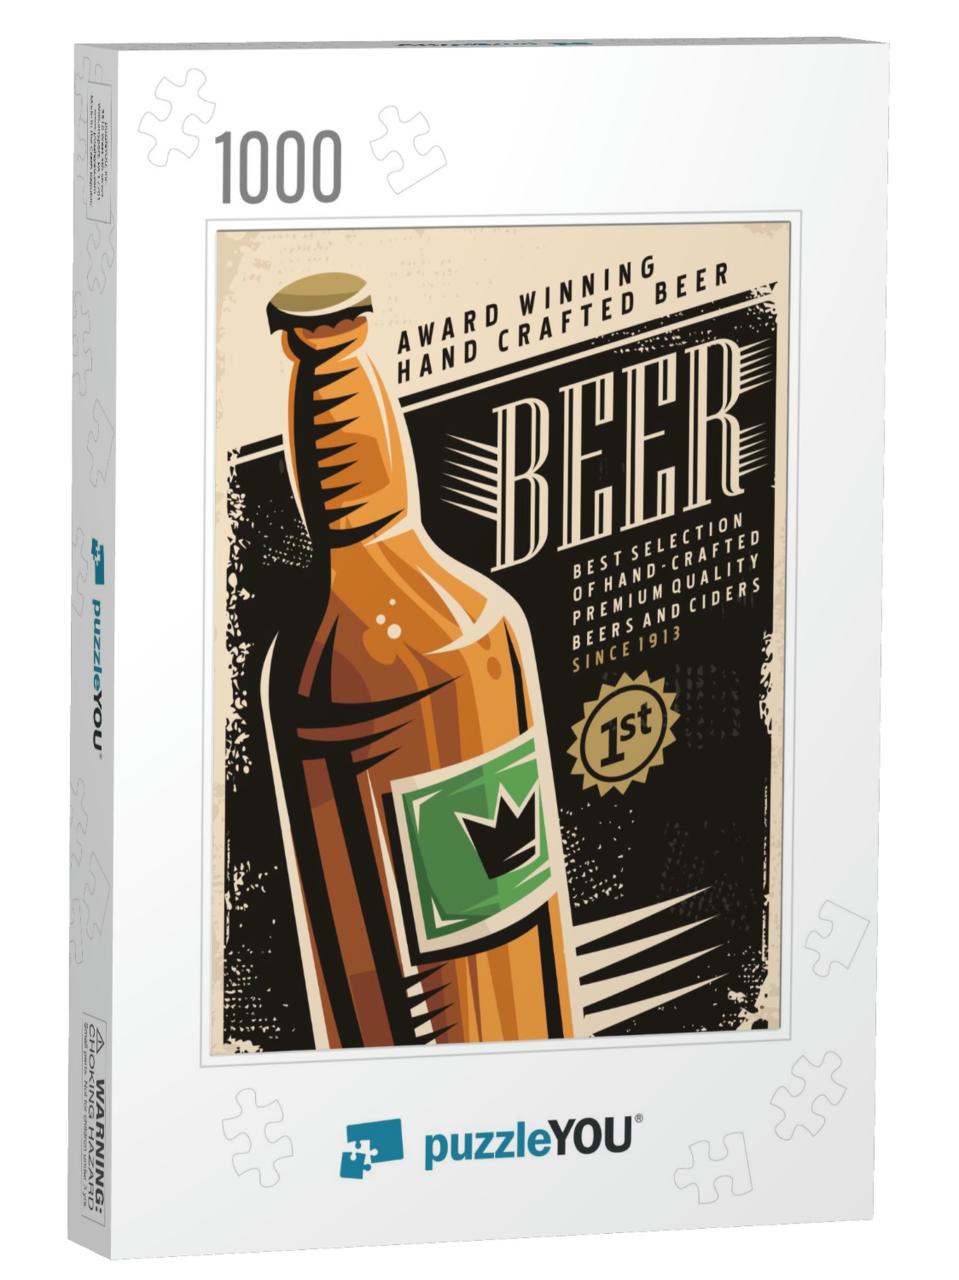 Beer Retro Poster Layout with Beer Bottle & Creative Typo... Jigsaw Puzzle with 1000 pieces